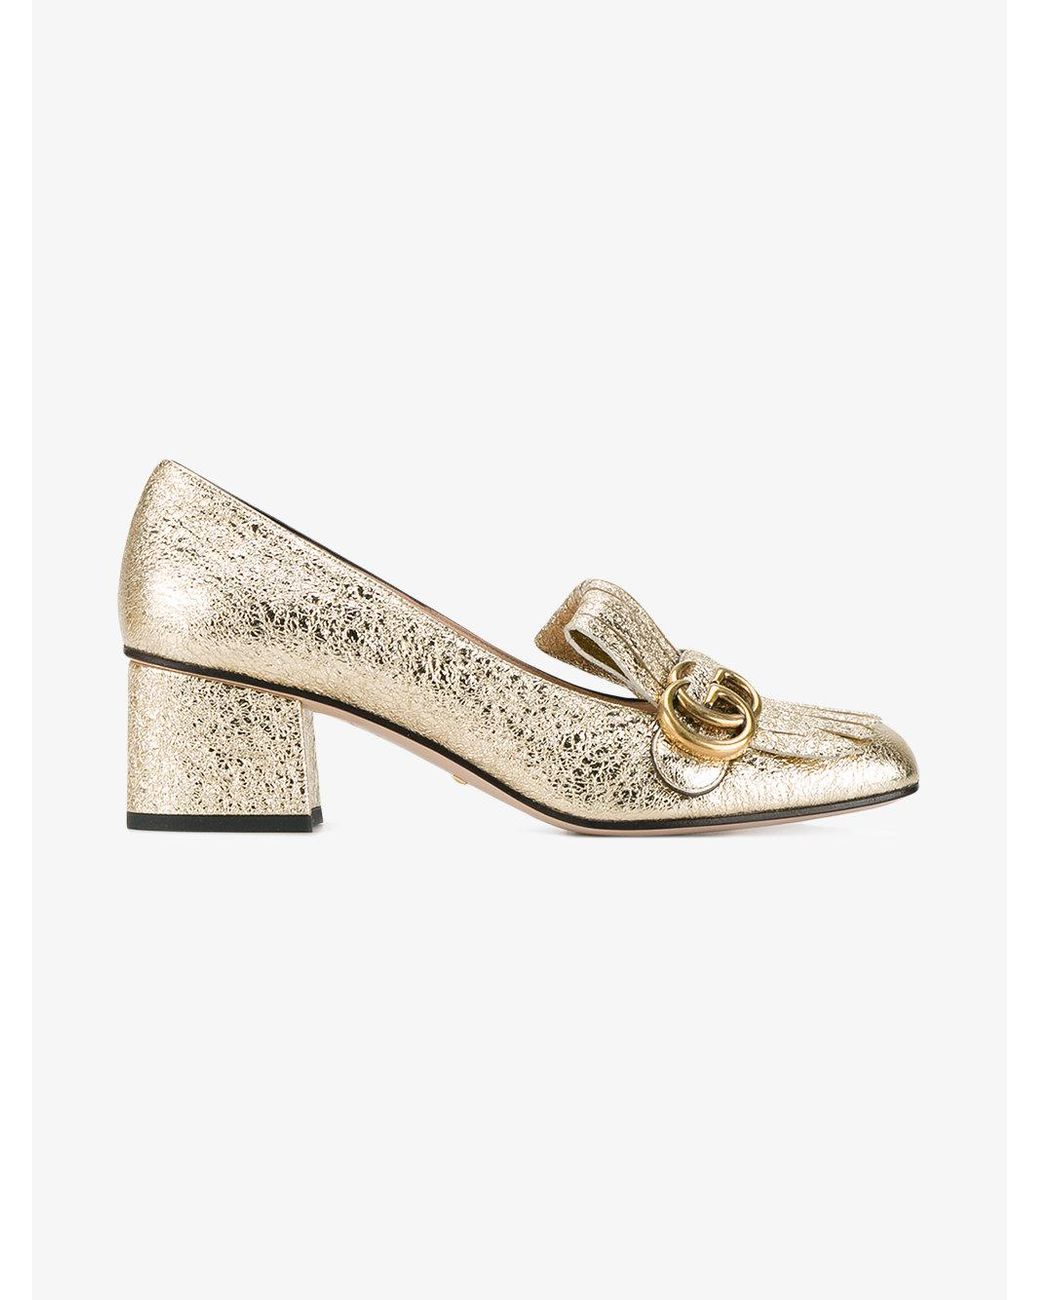 Gucci Gold Marmont 55mm Pumps in Metallic | Lyst